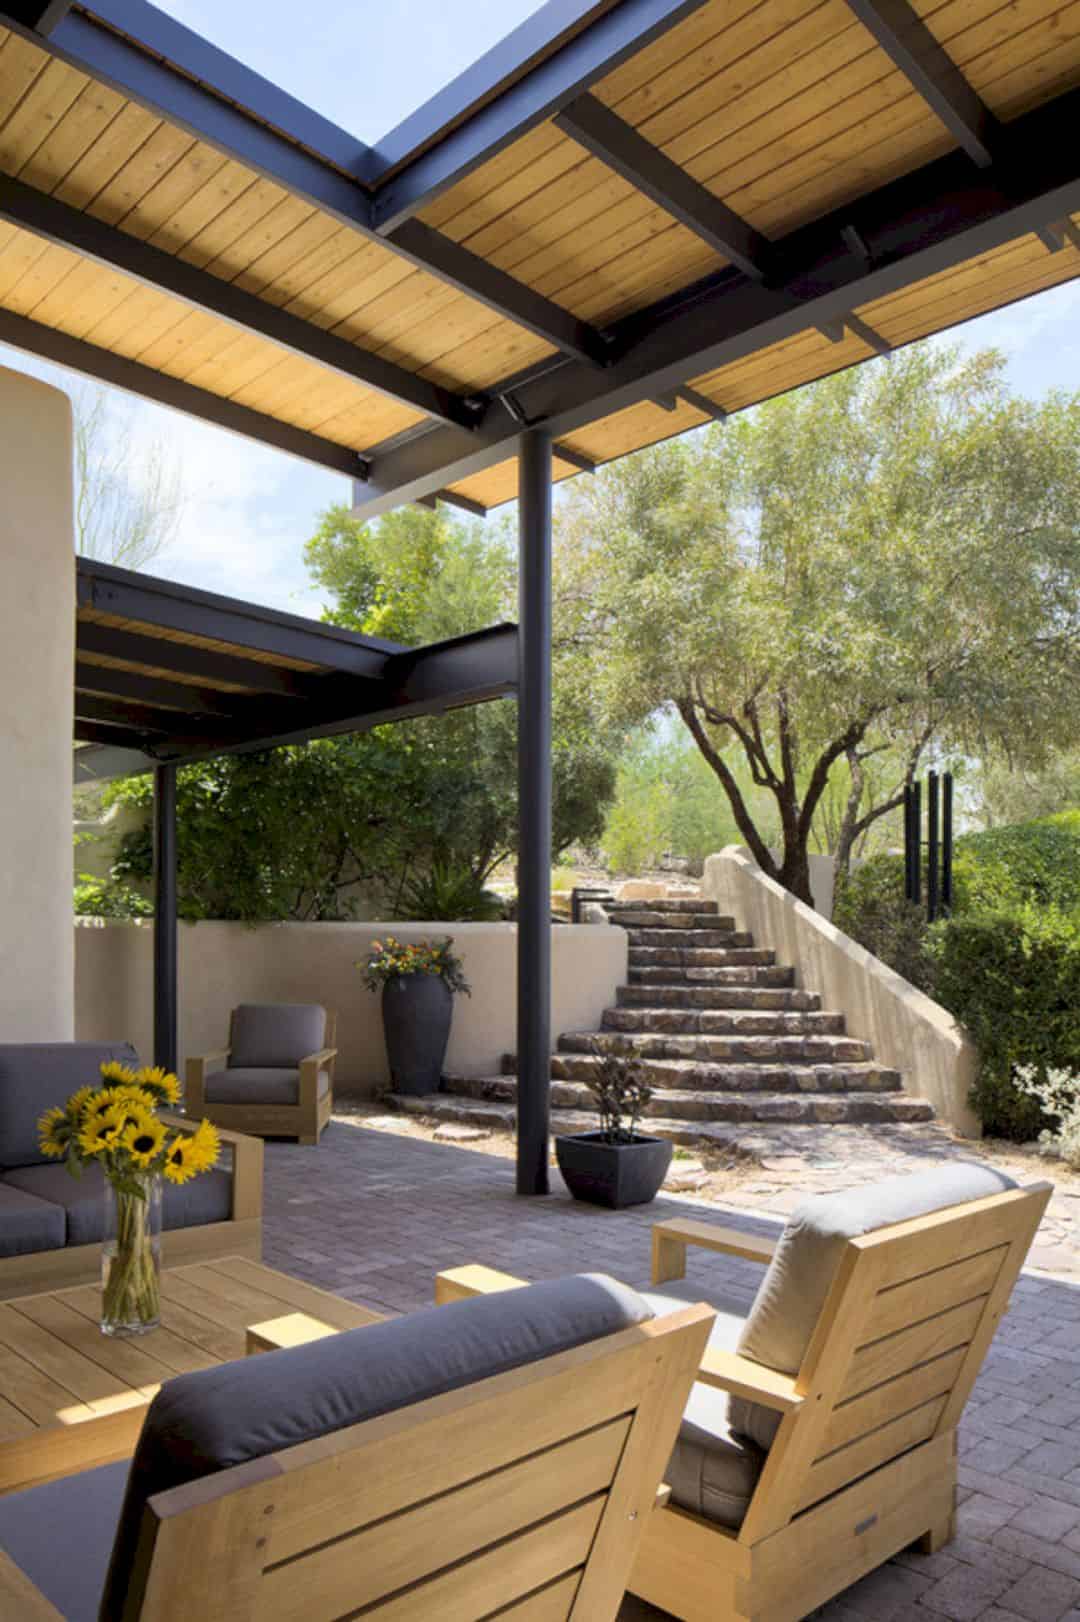 Canopy House Open Up Interior Spaces Embracing The Lush Landscape Of The Sonoran Desert 11